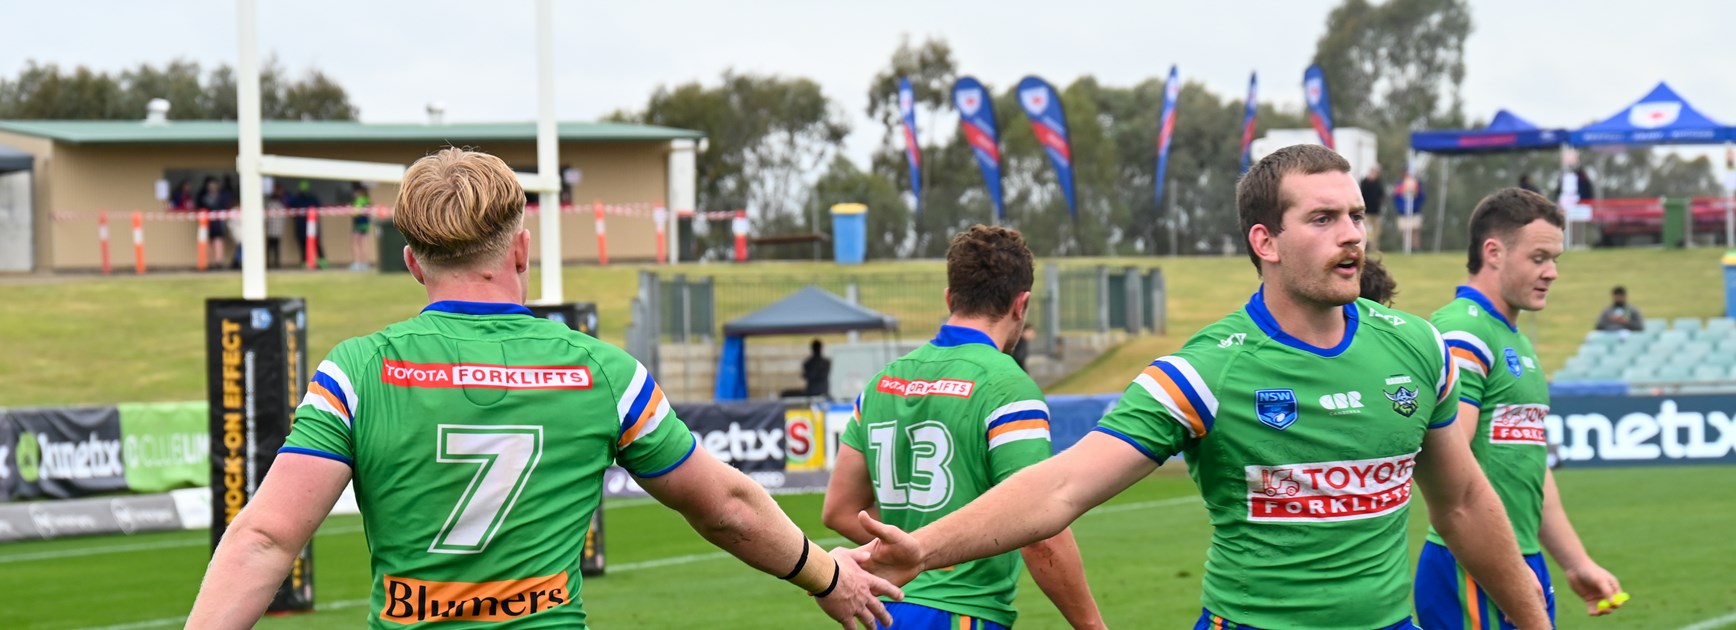 Raiders Flegg side back in winners circle after win over Souths